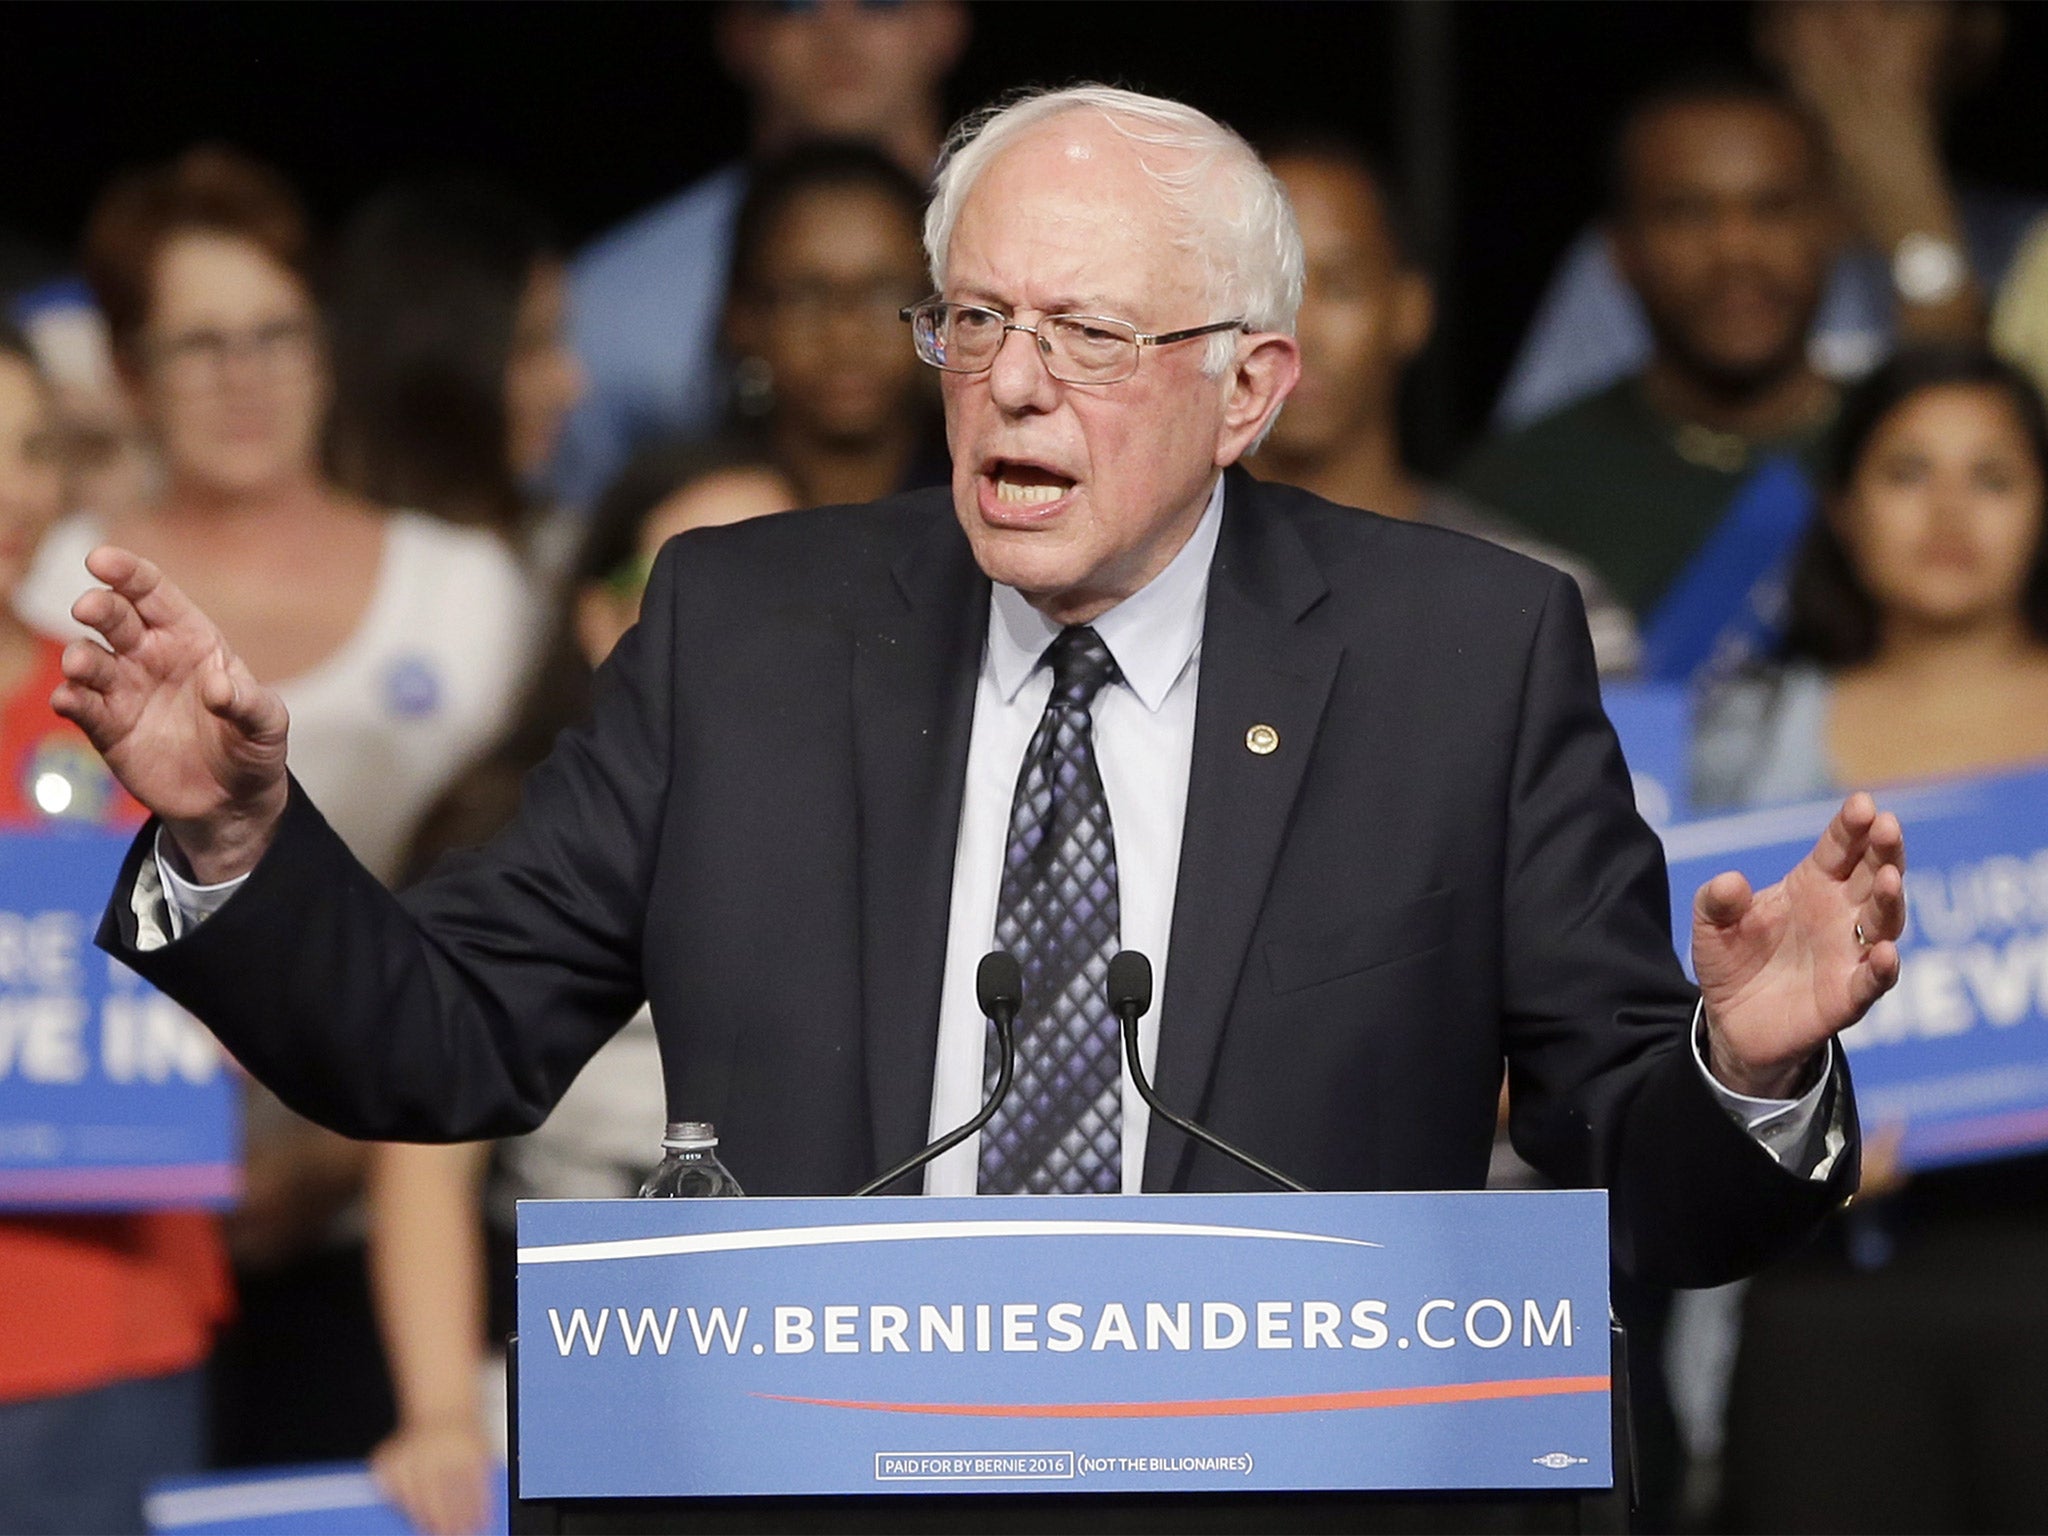 Bernie Sanders’s message in some ways appeals to the same audience that backs Donald Trump